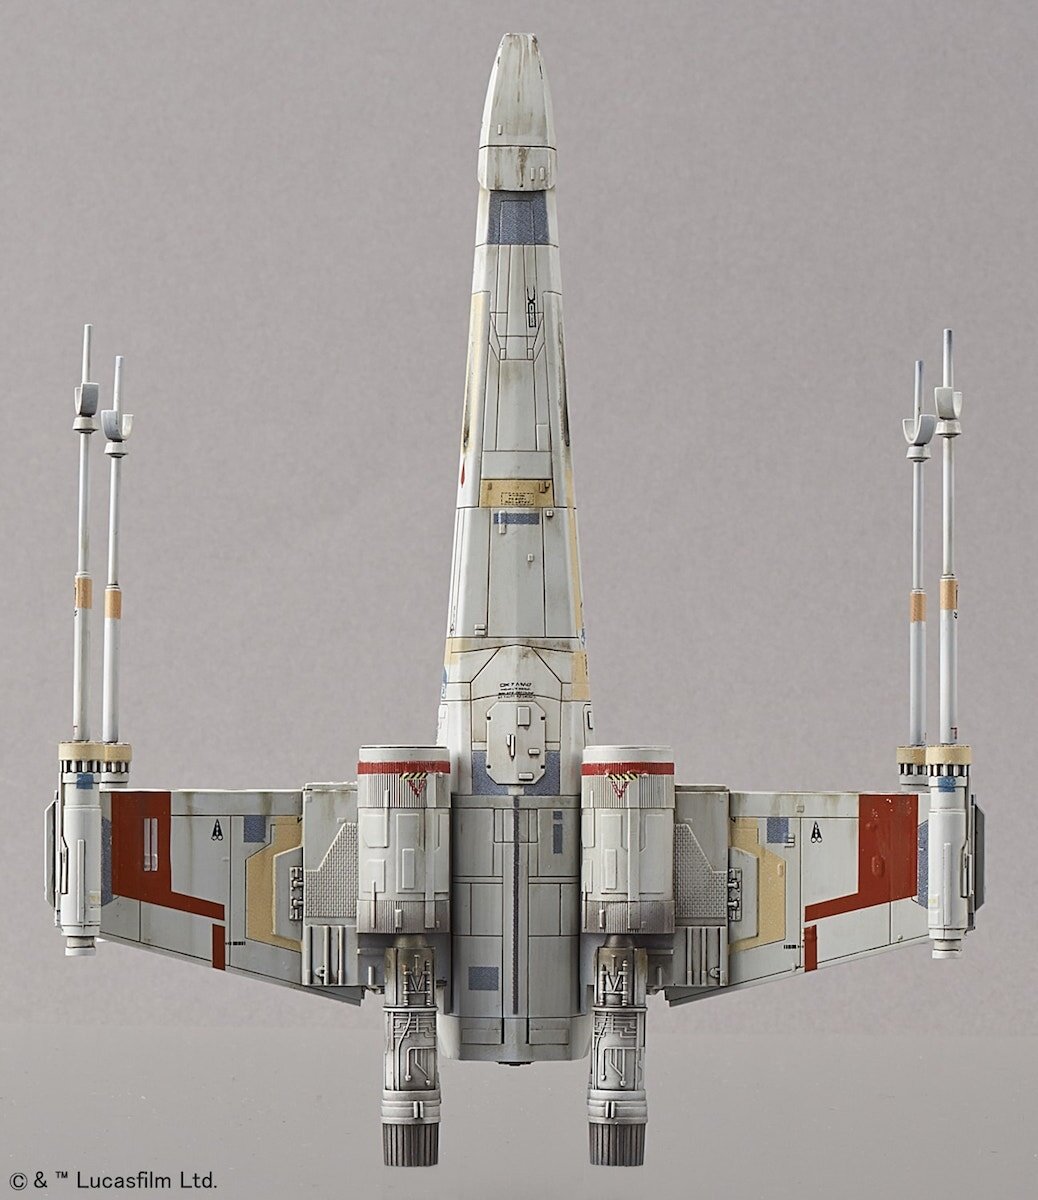 lego star wars red squadron